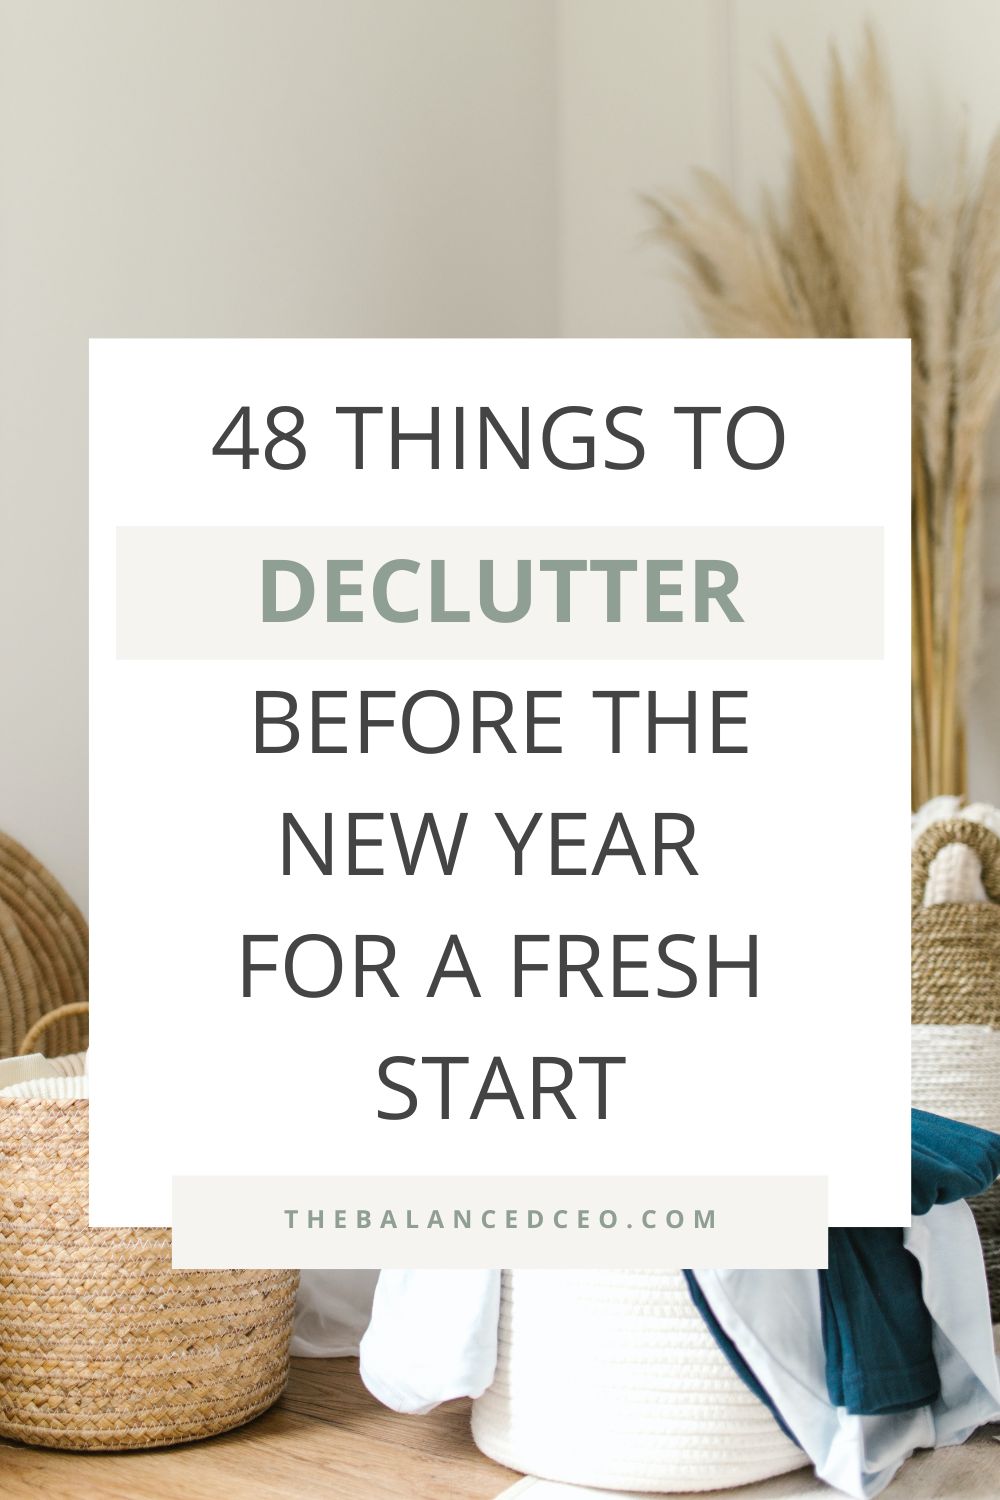 48 Things to Declutter Before the New Year for a Fresh Start